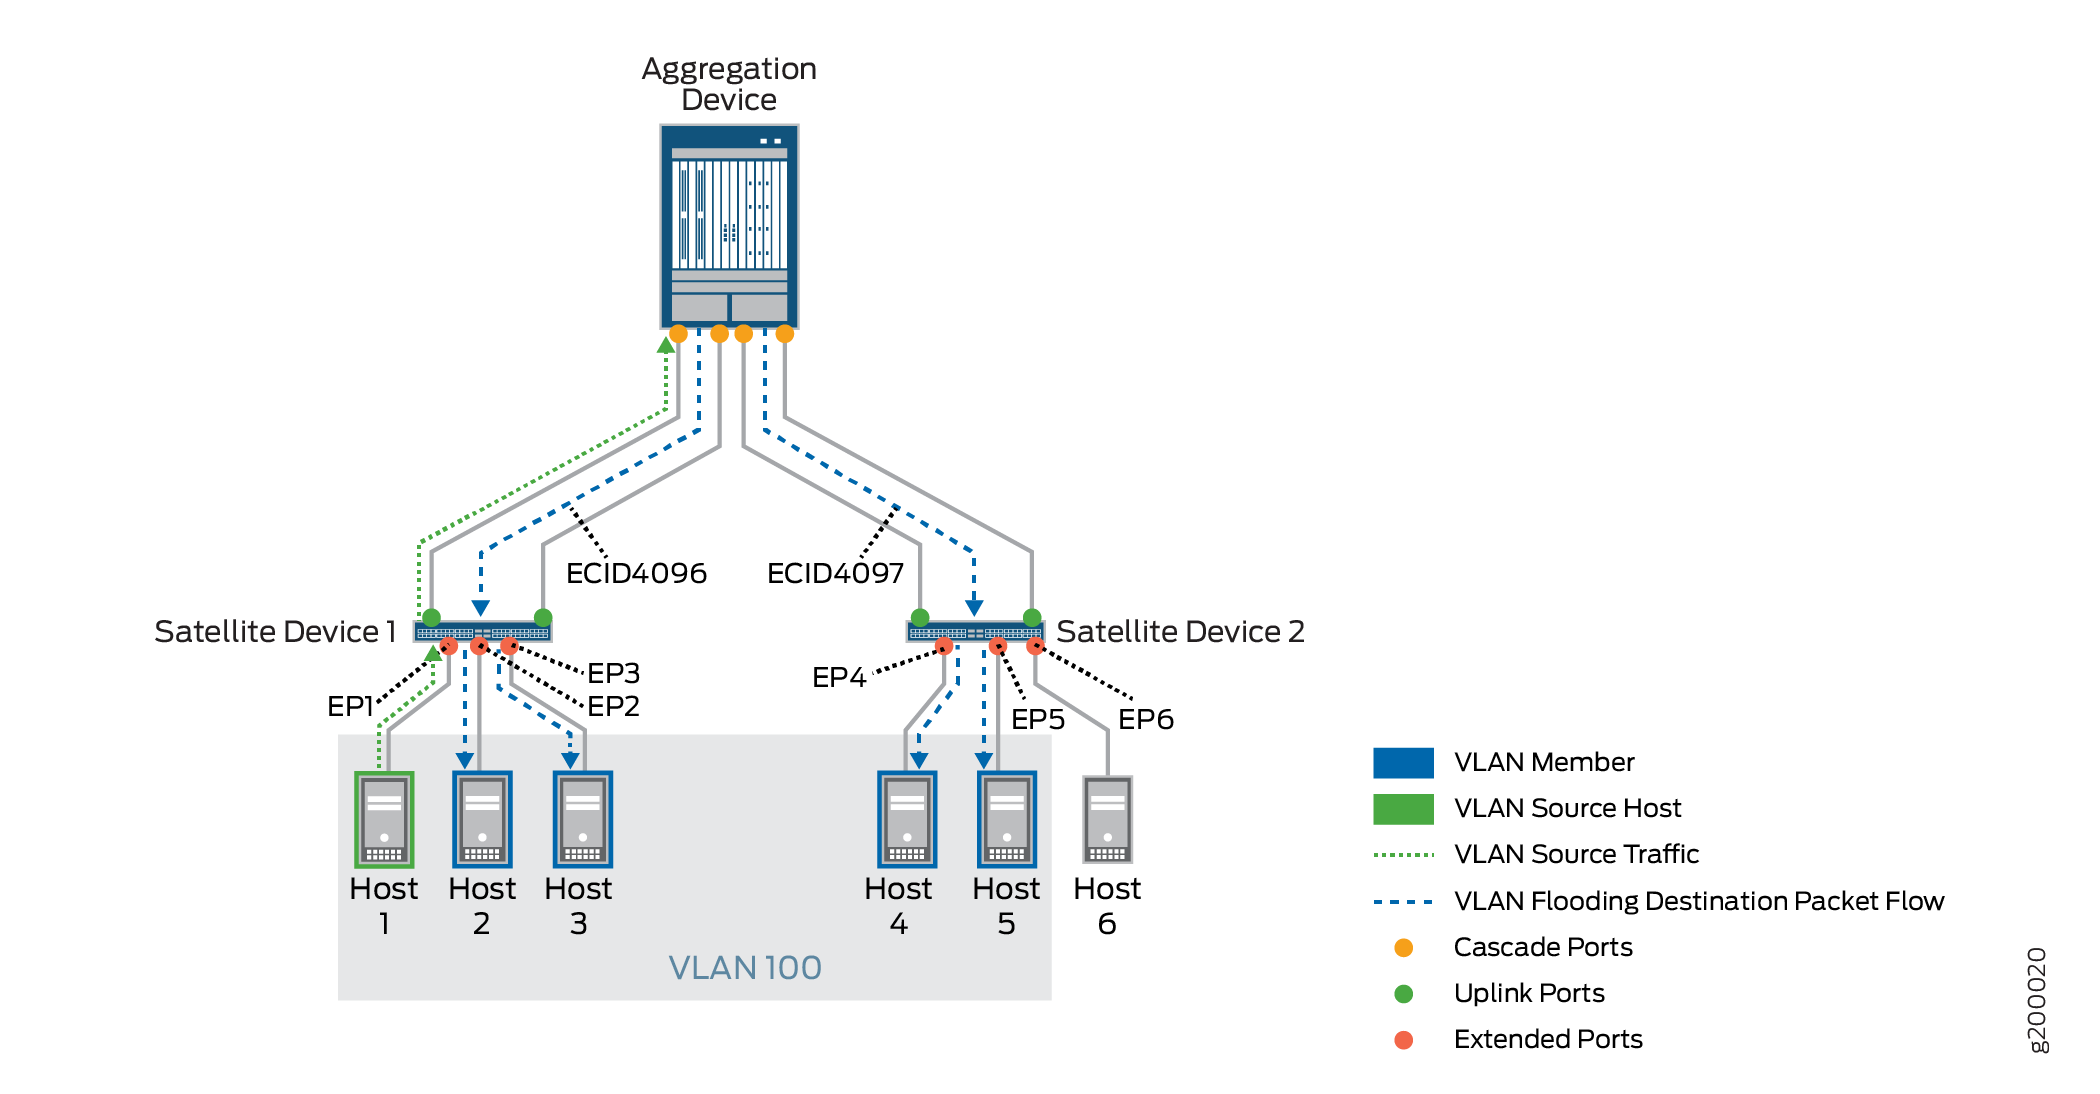 Local Replication with VLAN Flooding